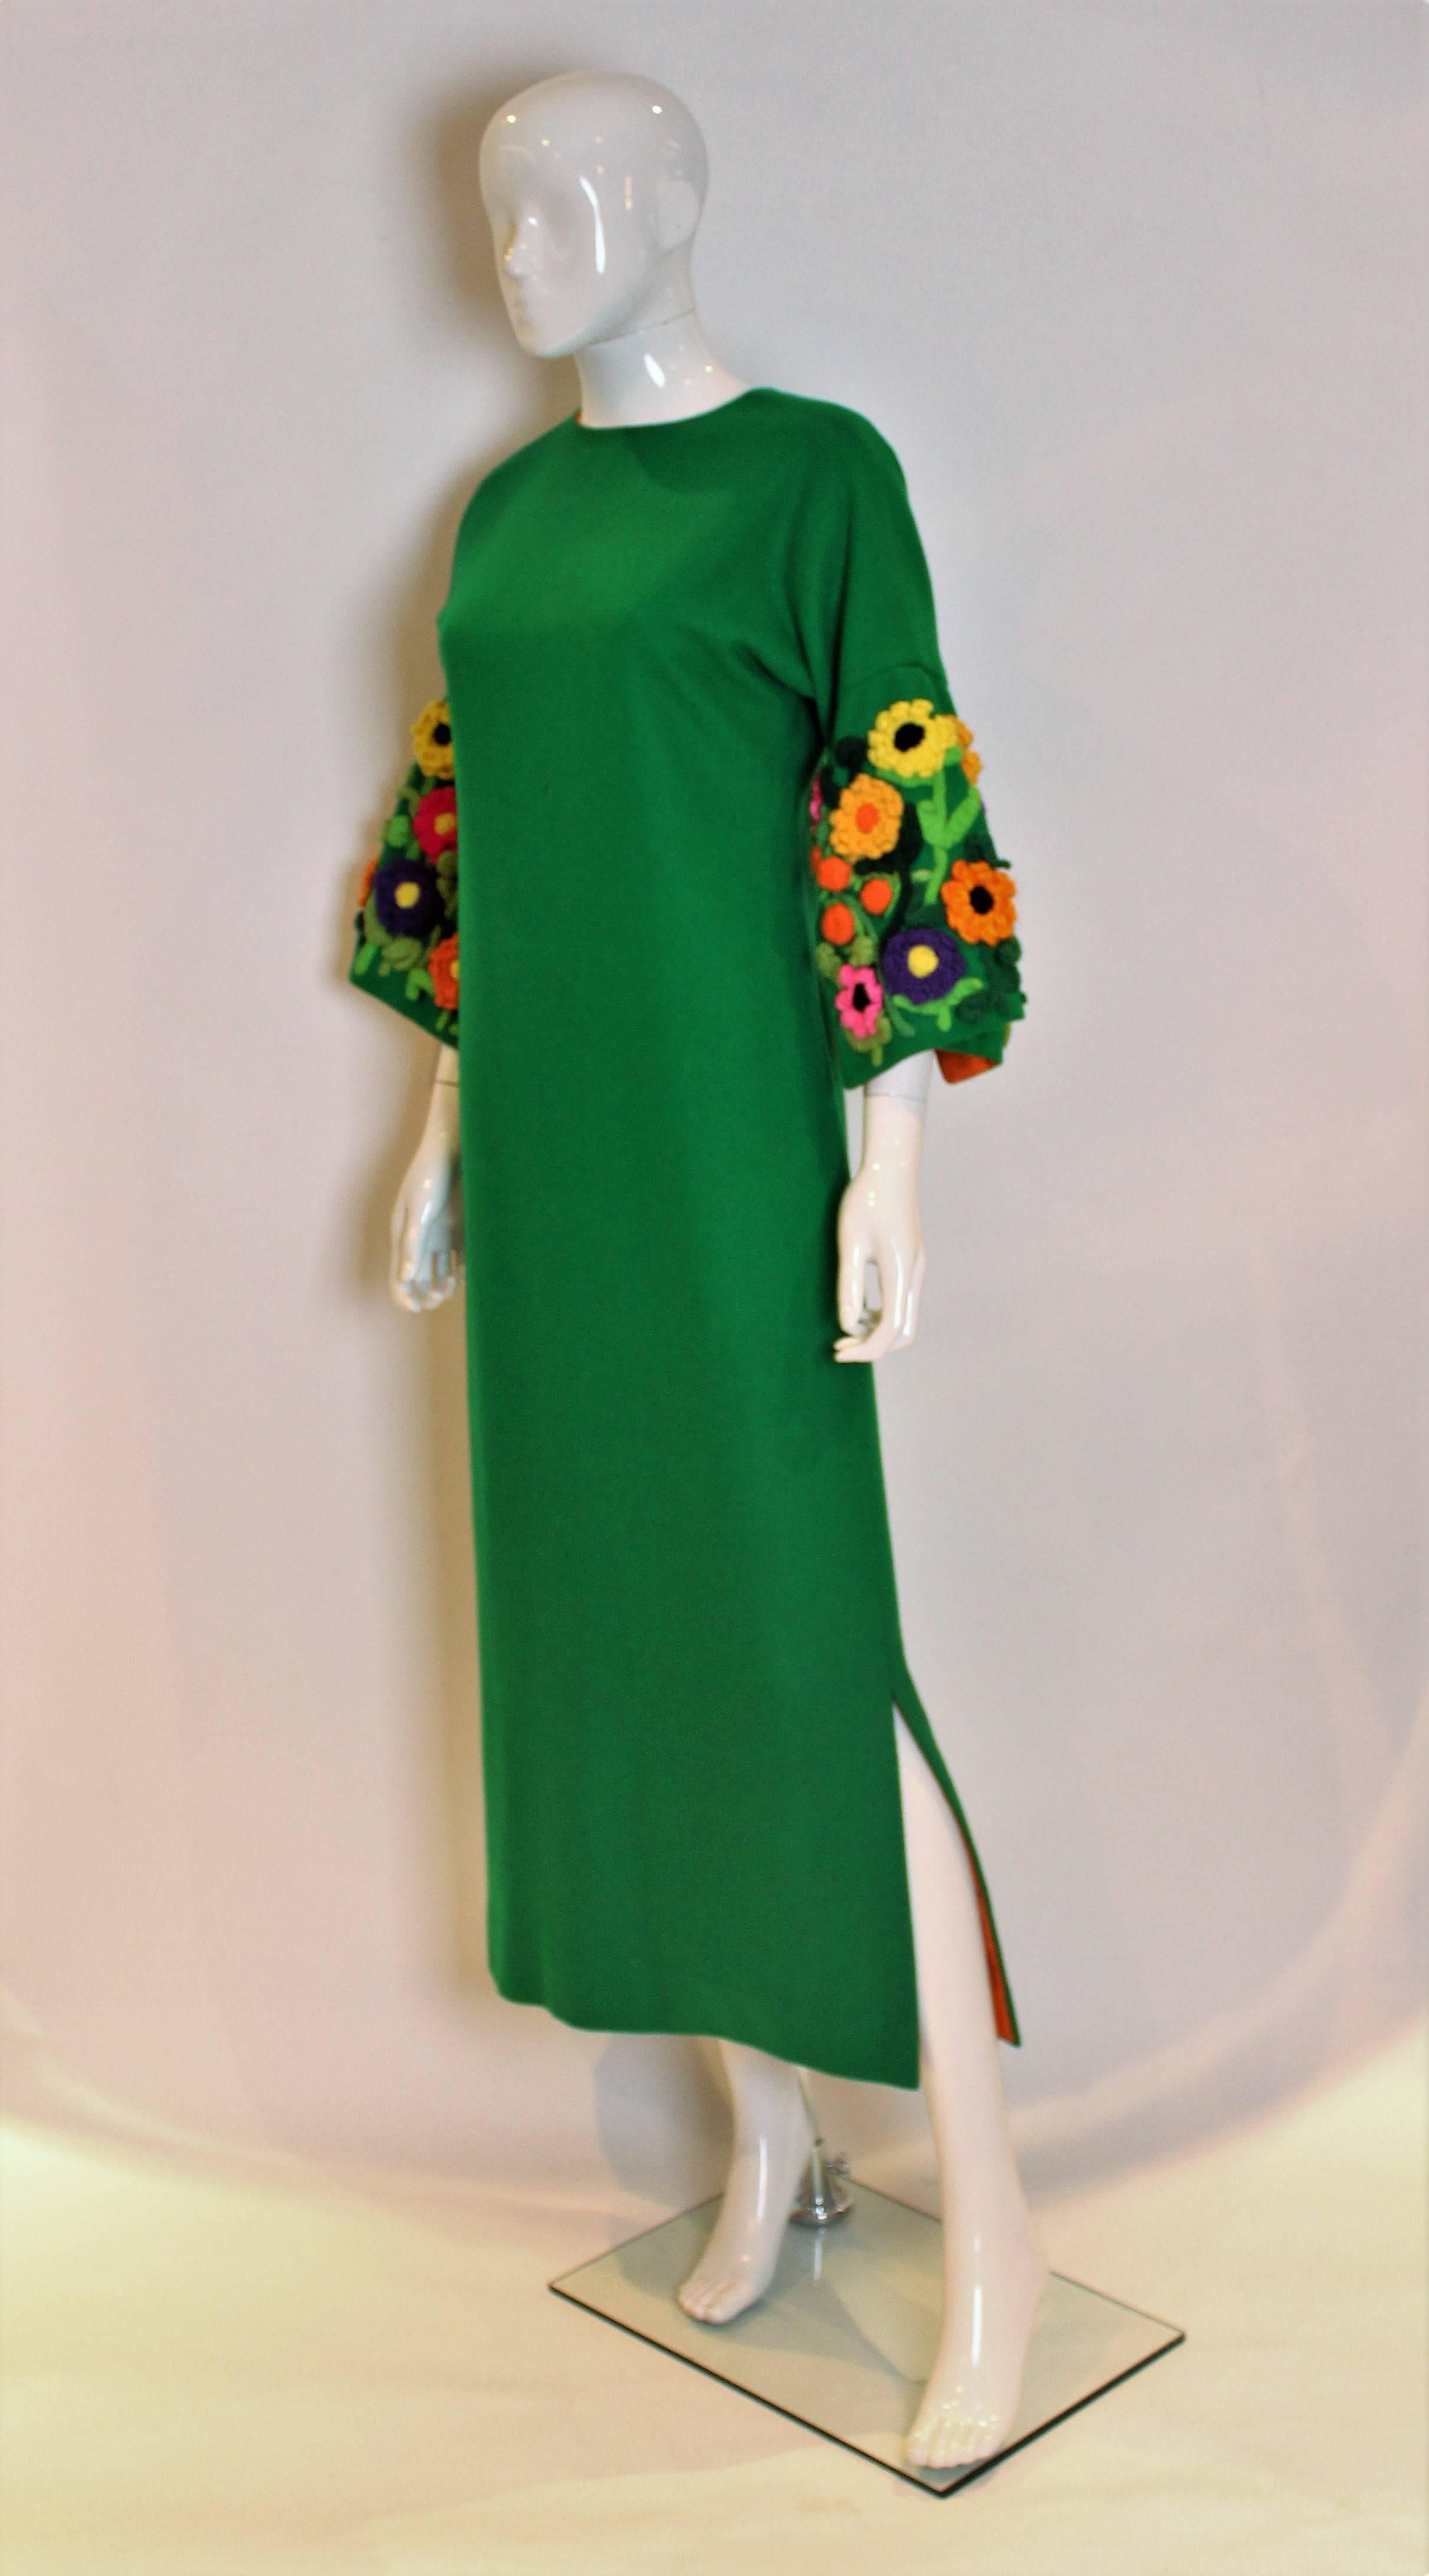 A striking shift dress from the 1960s . The outer dress is a bright green wool, and the lining is a vibrant orange.. The sleeves are a great shape with stunning floral decoration. The dress has a round neck, central back zip and 12 1/2